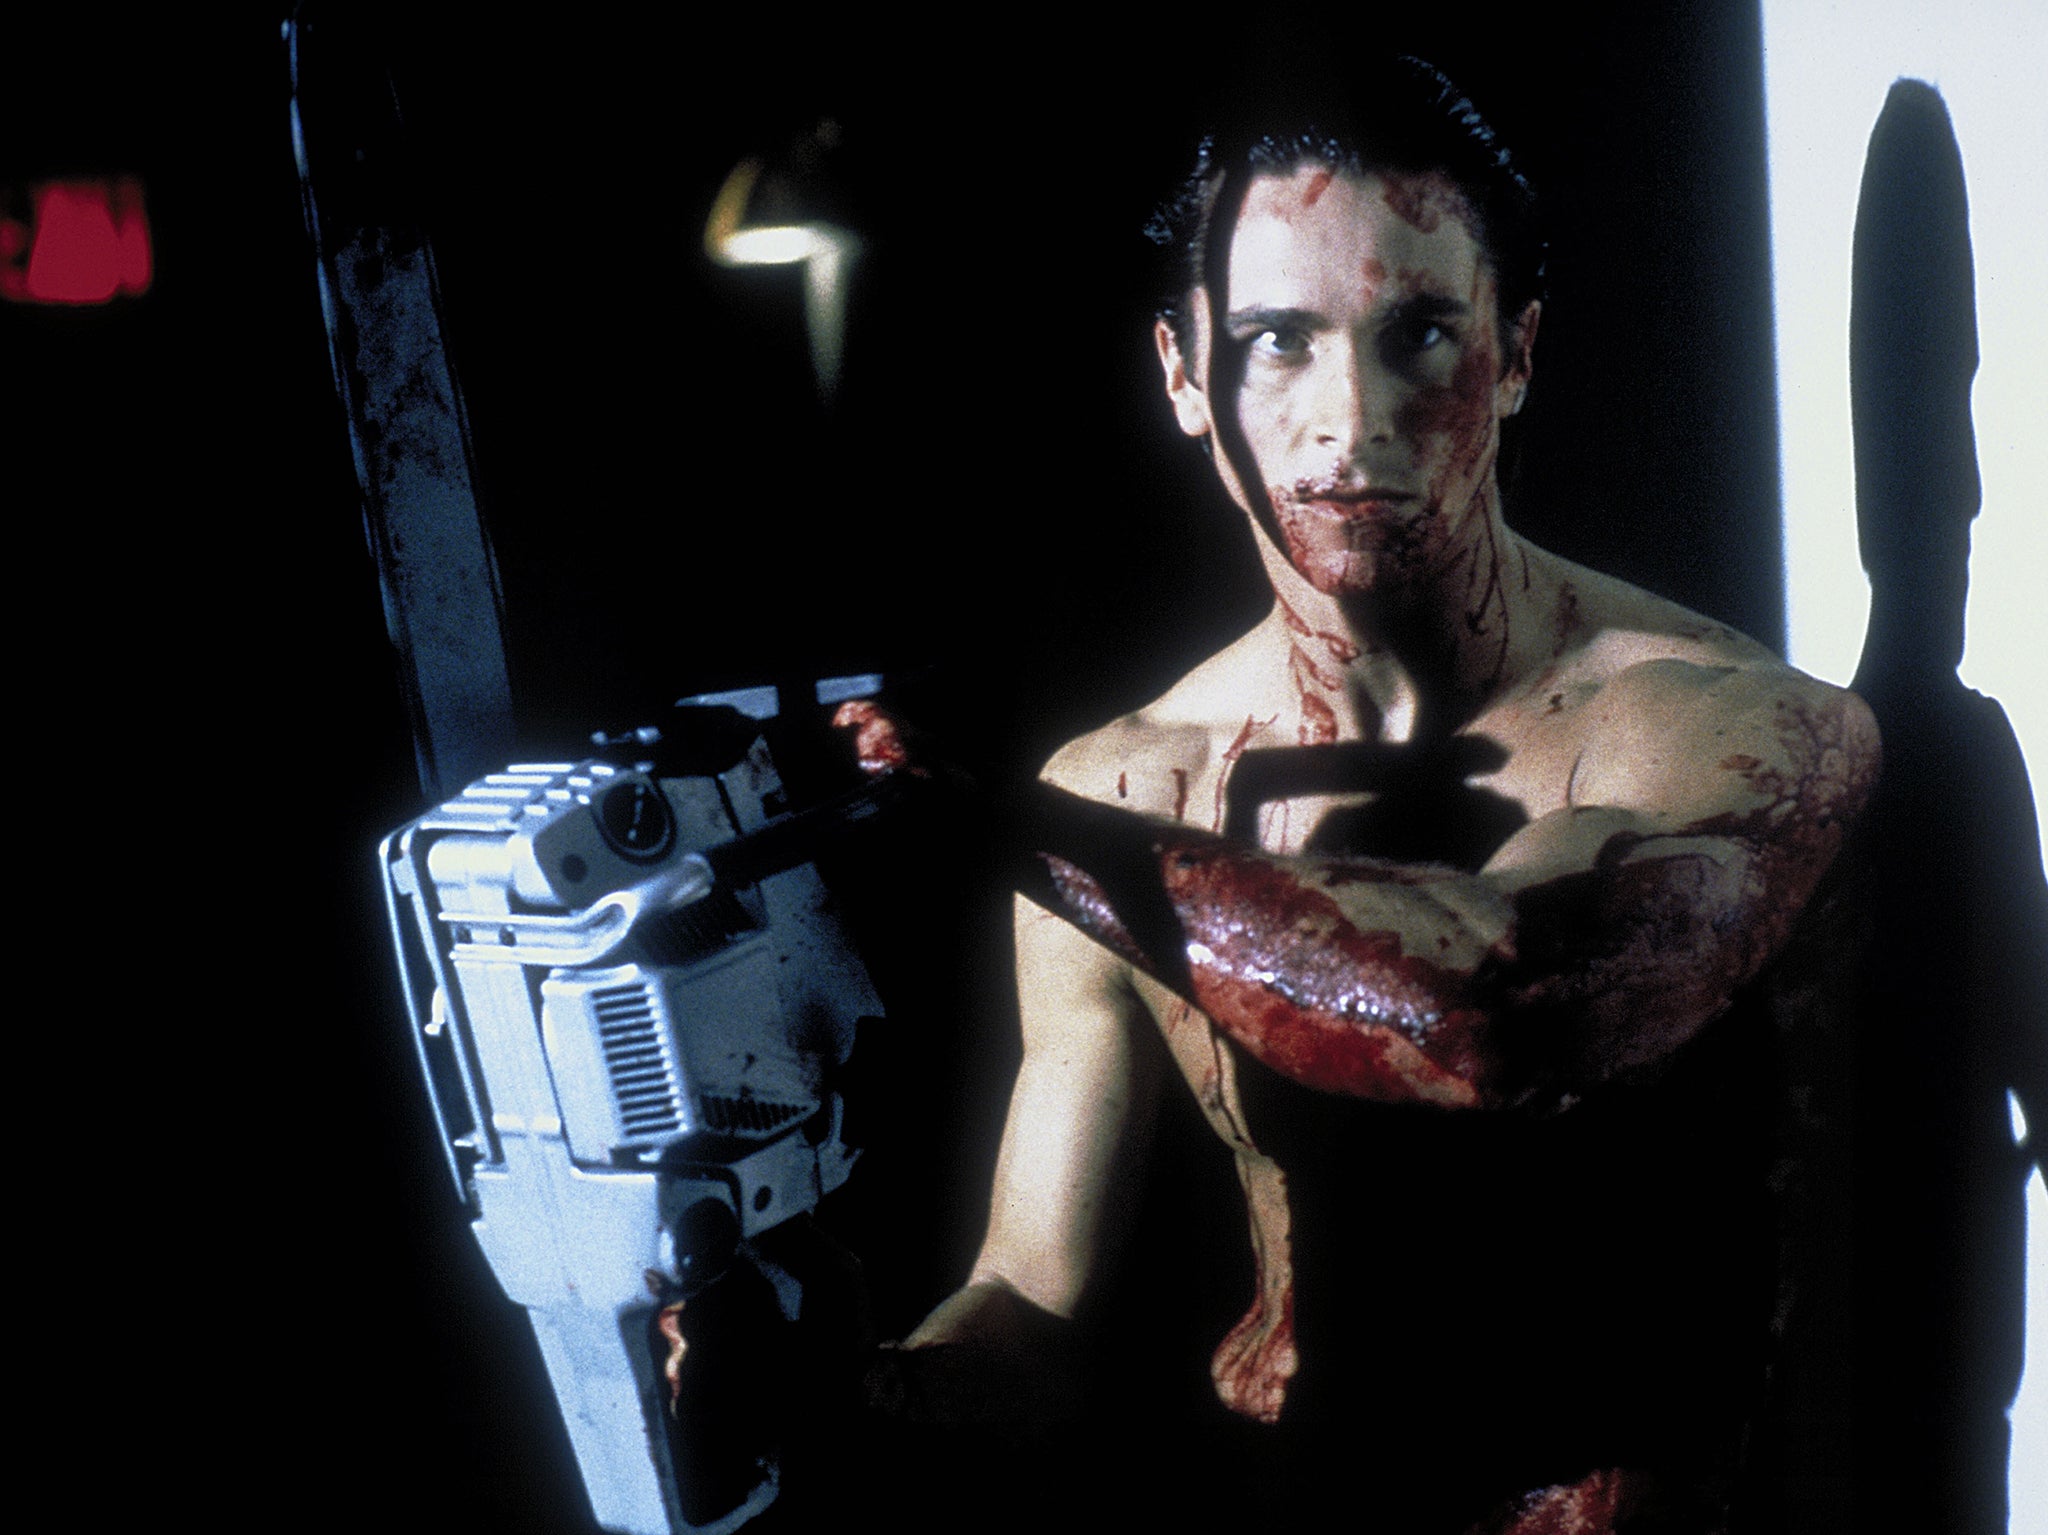 When 2000 cult film American Psycho appeared, people said Ellis’s career was over